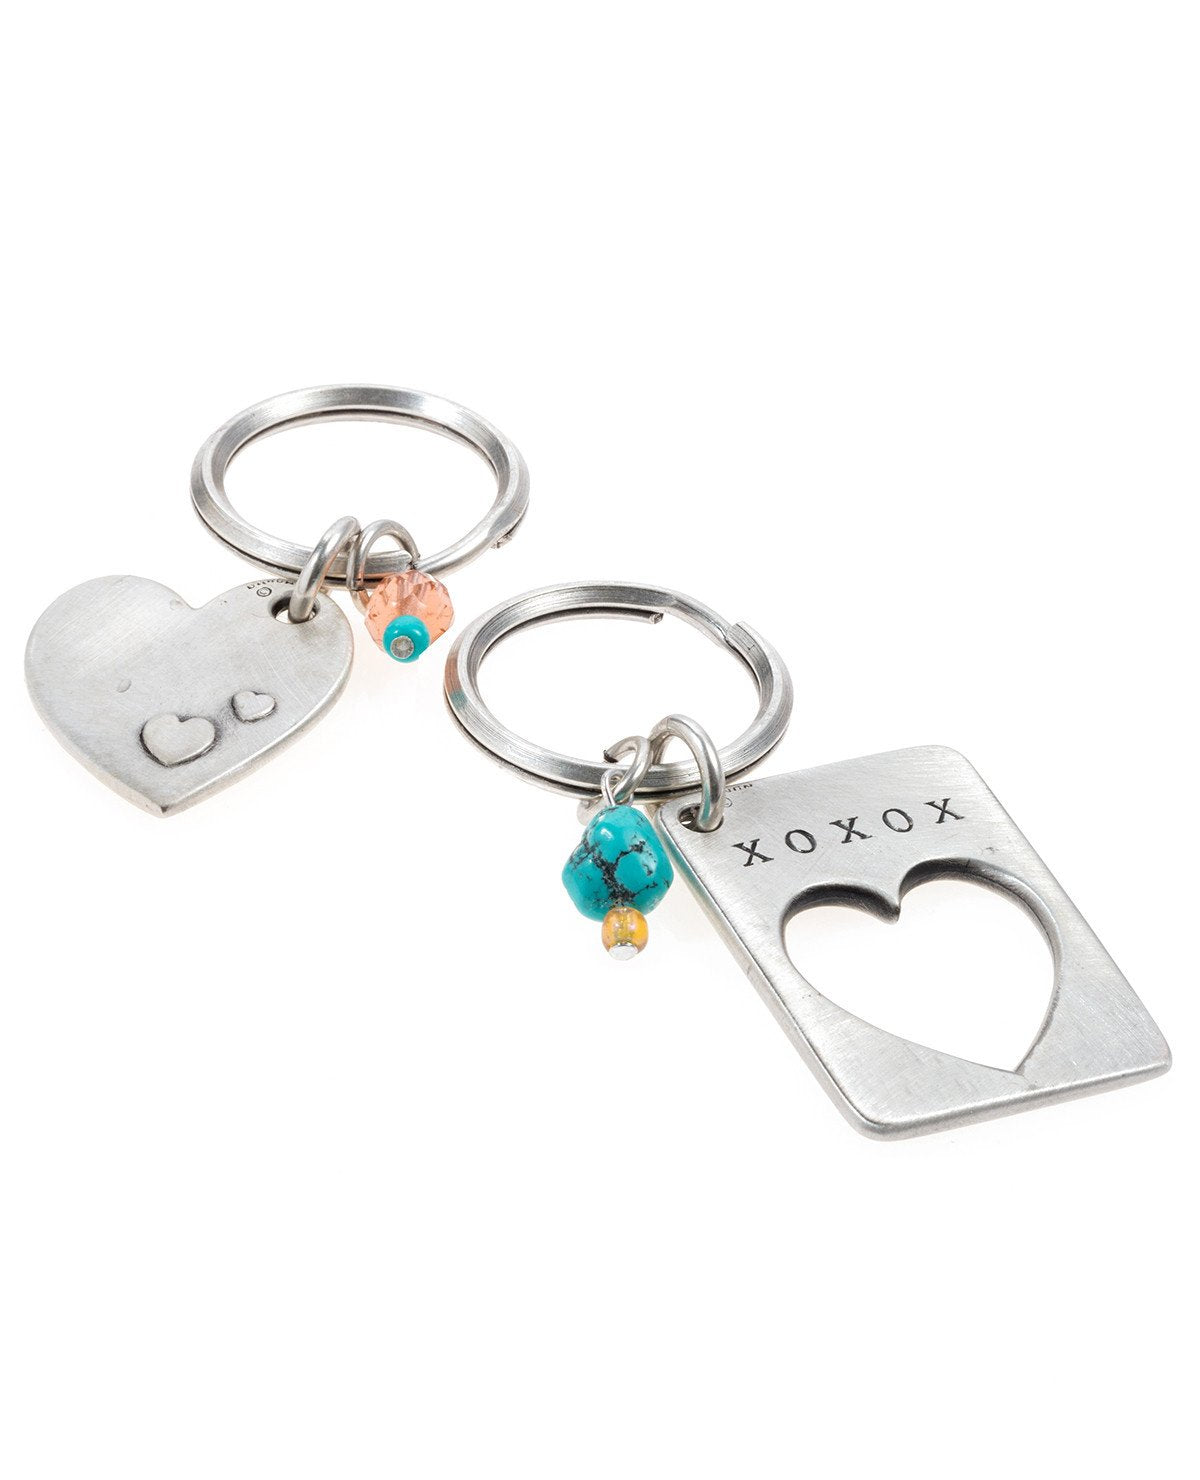 A visually remarkable and extremely romantic pair of keychains.
One is designed as a rectangle with a missing piece in the shape of a heart with the words "I Love U" written on top.
The other keychain is designed in the shape of a heart and has the words "I Love You More" written on it, perfectly completing the piece on the other keychain.
Each one of the keychains is decorated by two colorful beads.
The keychains are coated in sterling silver and are strong and reliable. 
A perfect and romantic gift for an